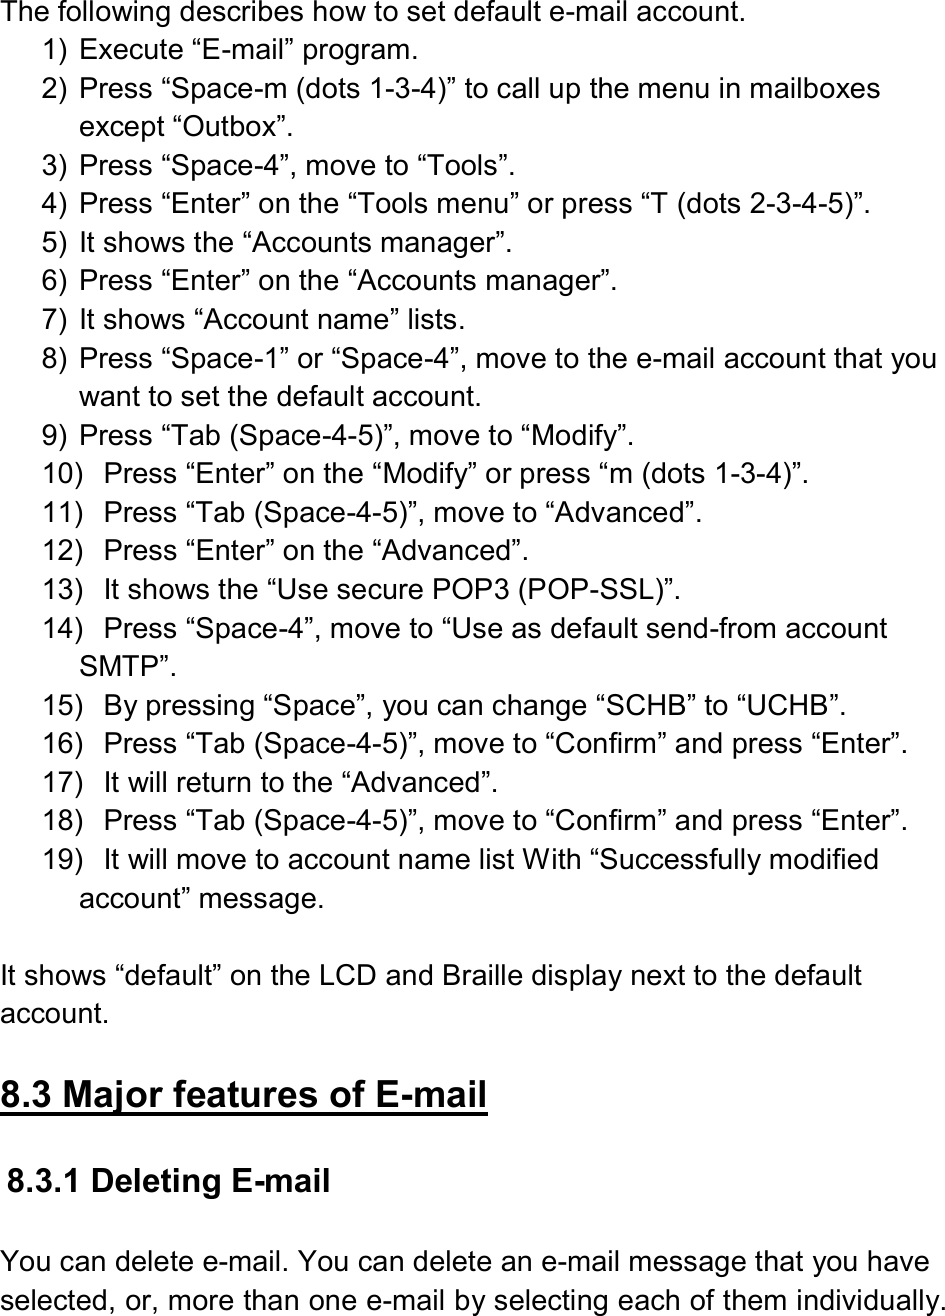   The following describes how to set default e-mail account. 1)  Execute “E-mail” program. 2)  Press “Space-m (dots 1-3-4)” to call up the menu in mailboxes except “Outbox”. 3)  Press “Space-4”, move to “Tools”. 4)  Press “Enter” on the “Tools menu” or press “T (dots 2-3-4-5)”. 5)  It shows the “Accounts manager”. 6)  Press “Enter” on the “Accounts manager”.   7)  It shows “Account name” lists. 8)  Press “Space-1” or “Space-4”, move to the e-mail account that you want to set the default account. 9)  Press “Tab (Space-4-5)”, move to “Modify”. 10)  Press “Enter” on the “Modify” or press “m (dots 1-3-4)”. 11)  Press “Tab (Space-4-5)”, move to “Advanced”. 12)  Press “Enter” on the “Advanced”. 13)  It shows the “Use secure POP3 (POP-SSL)”. 14)  Press “Space-4”, move to “Use as default send-from account SMTP”. 15)  By pressing “Space”, you can change “SCHB” to “UCHB”. 16)  Press “Tab (Space-4-5)”, move to “Confirm” and press “Enter”. 17)  It will return to the “Advanced”. 18)  Press “Tab (Space-4-5)”, move to “Confirm” and press “Enter”. 19)  It will move to account name list With “Successfully modified account” message.  It shows “default” on the LCD and Braille display next to the default account.  8.3 Major features of E-mail  8.3.1 Deleting E-mail  You can delete e-mail. You can delete an e-mail message that you have selected, or, more than one e-mail by selecting each of them individually.  